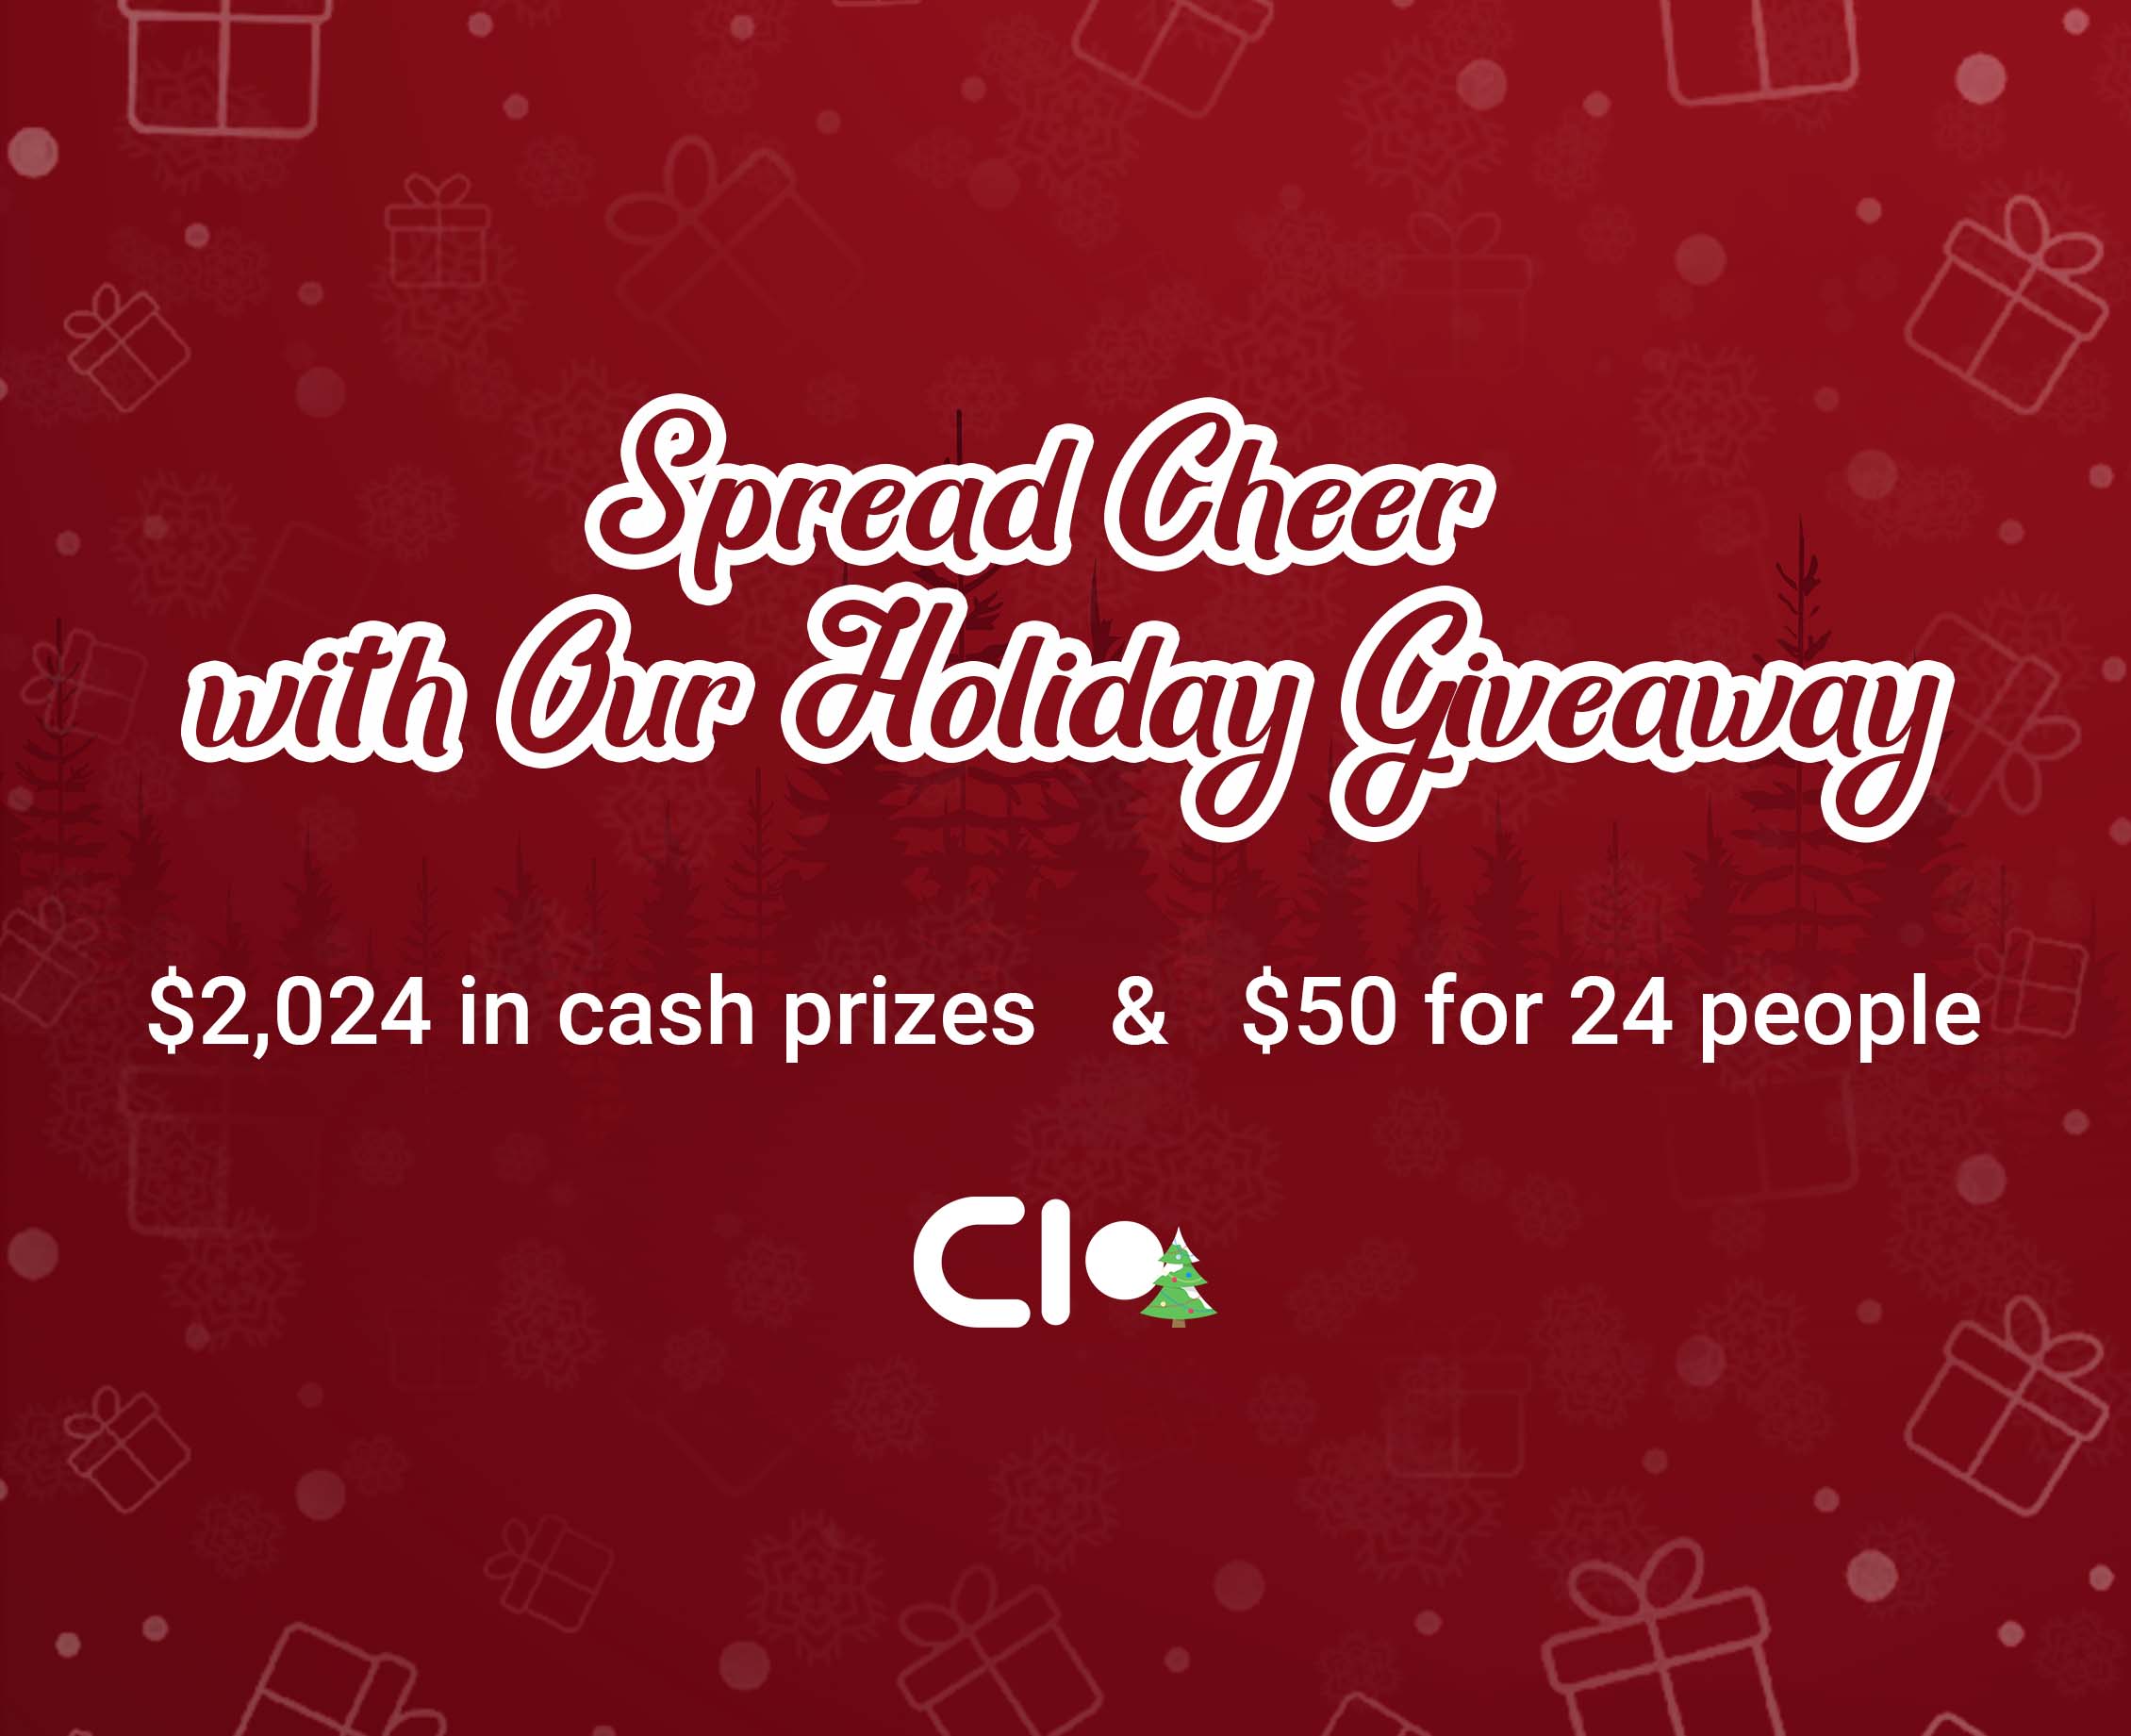 Get Ready for Big Wins in Our End-of-the-Year Contest – Everyone Stands a Chance!